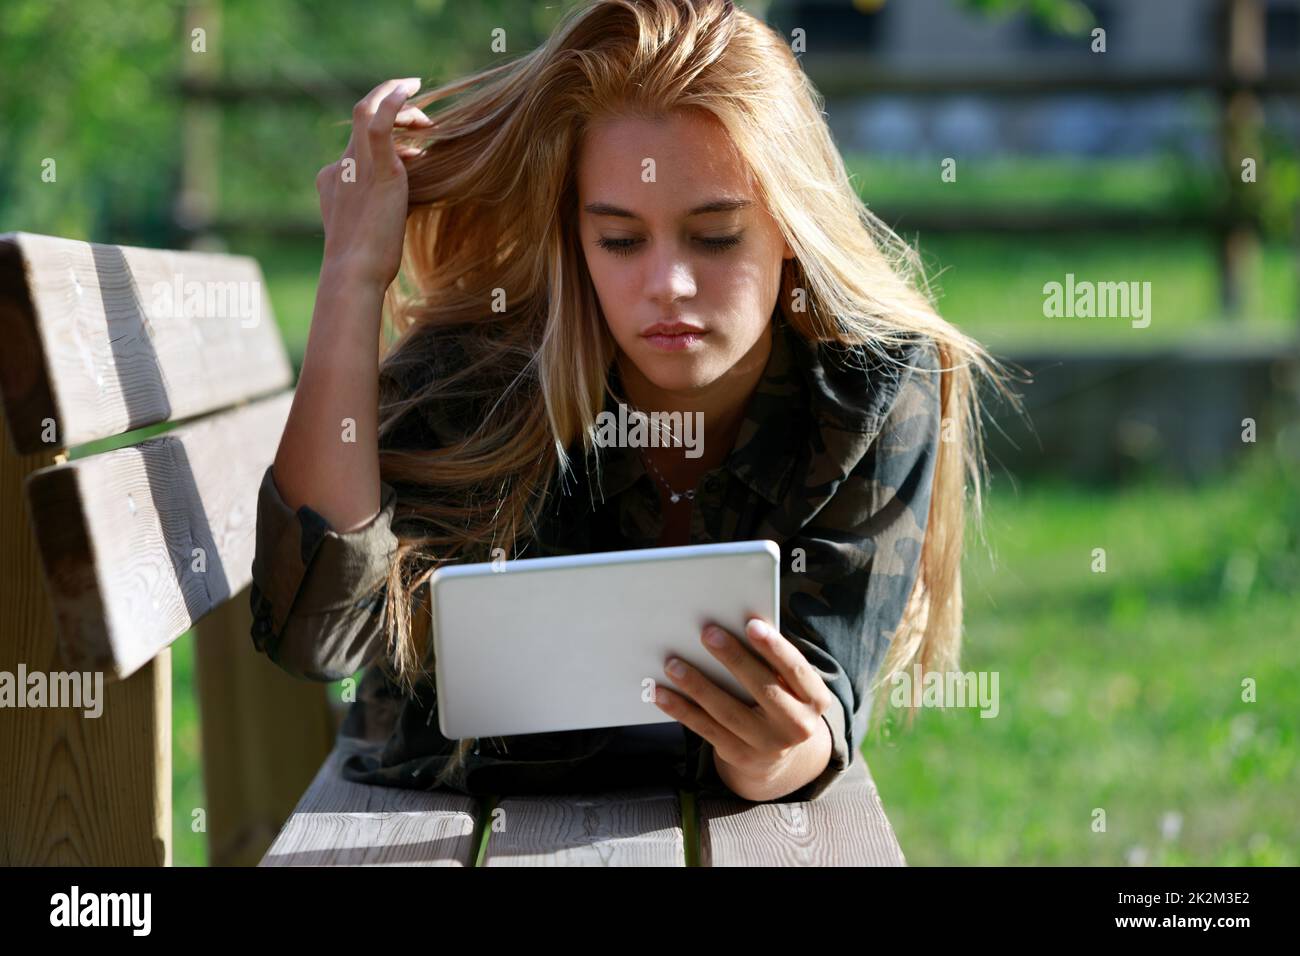 Young woman twiddling with her hair as she relaxes outdoors Stock Photo